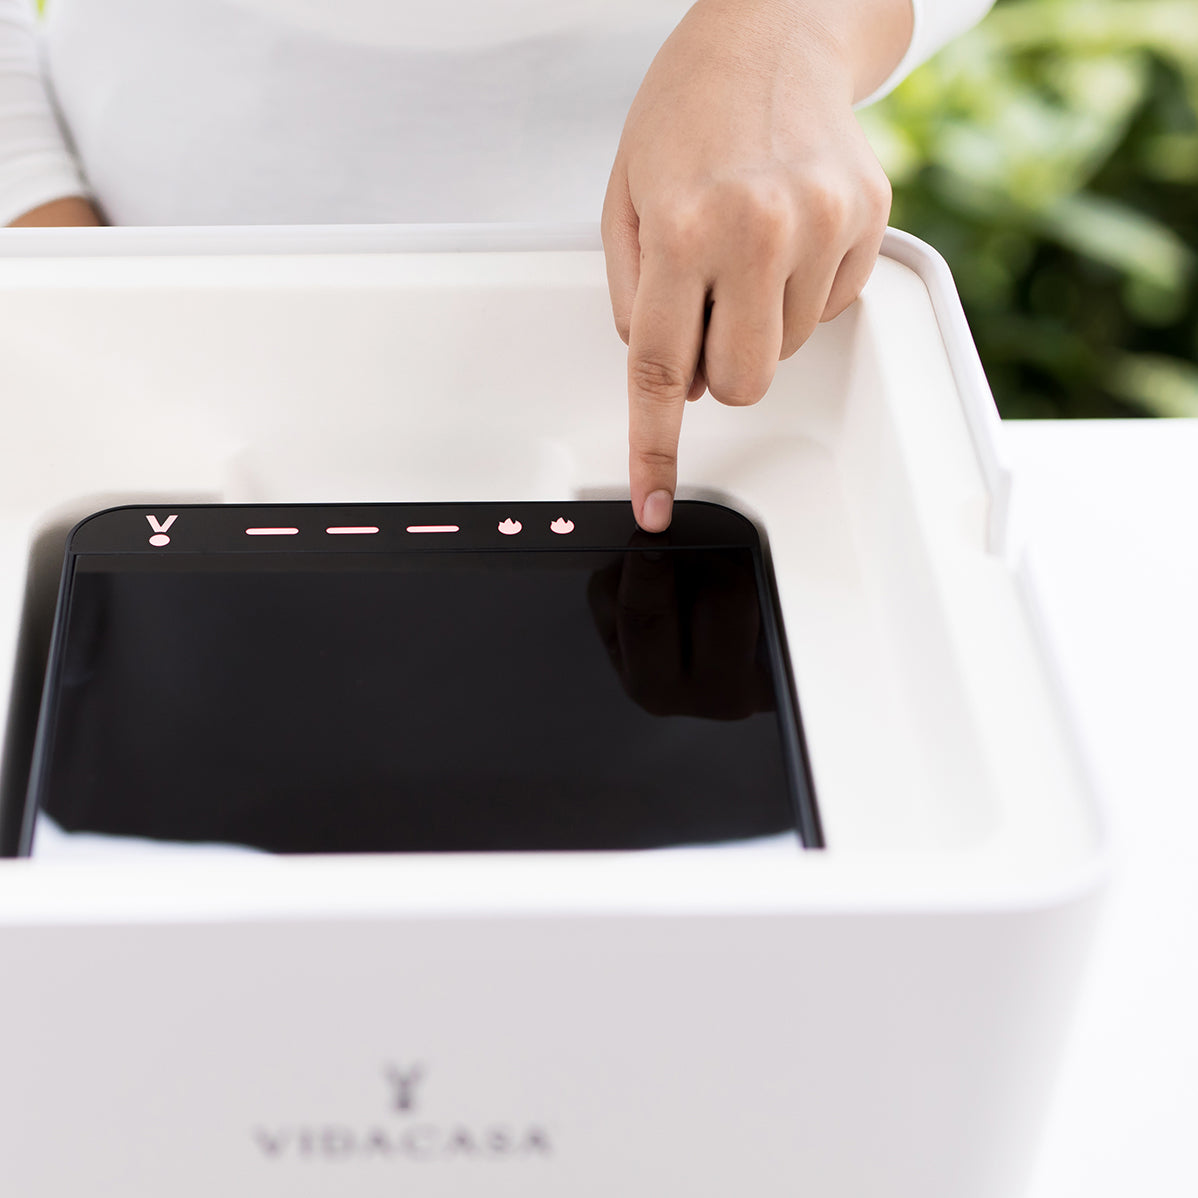 Vidacasa® H1X food warmer is the most reliable wireless electric heating plate that can maintain cooked food warm for hours without dangling cords, chafing fuels or tealight candles. 